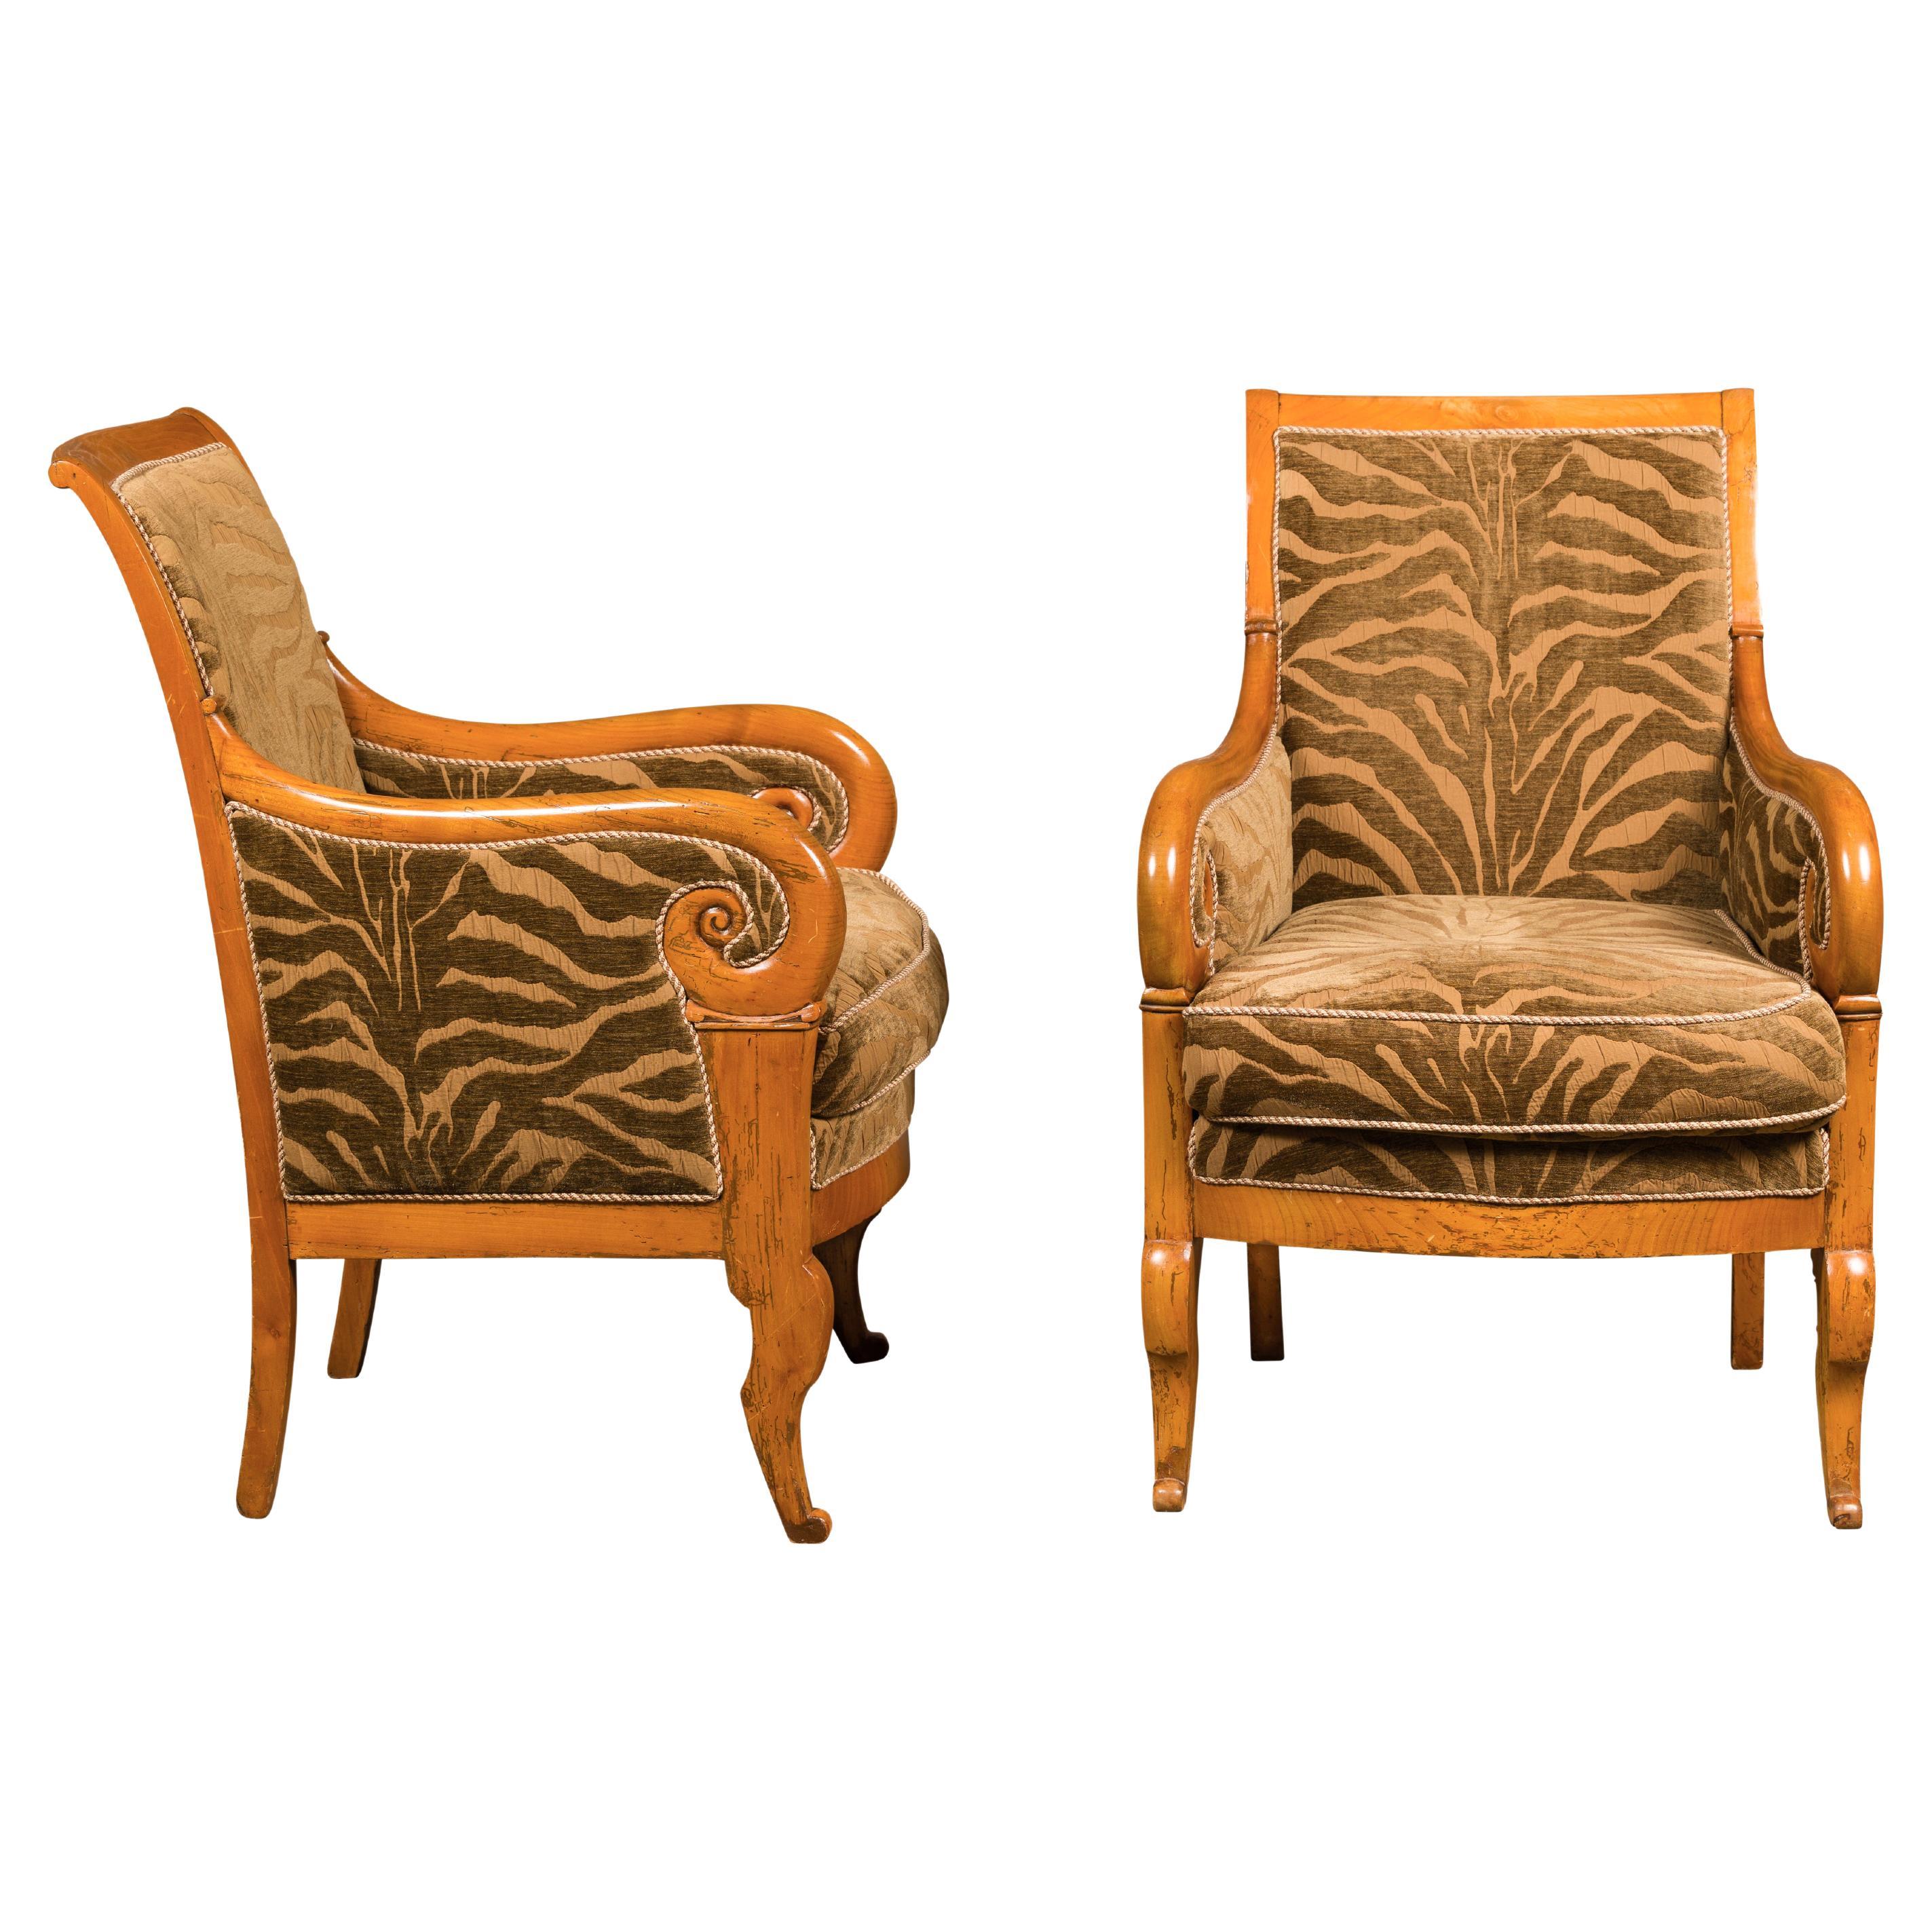 French Walnut 19th Century Bergère Chairs with Carved Arms and Zebra Upholstery For Sale